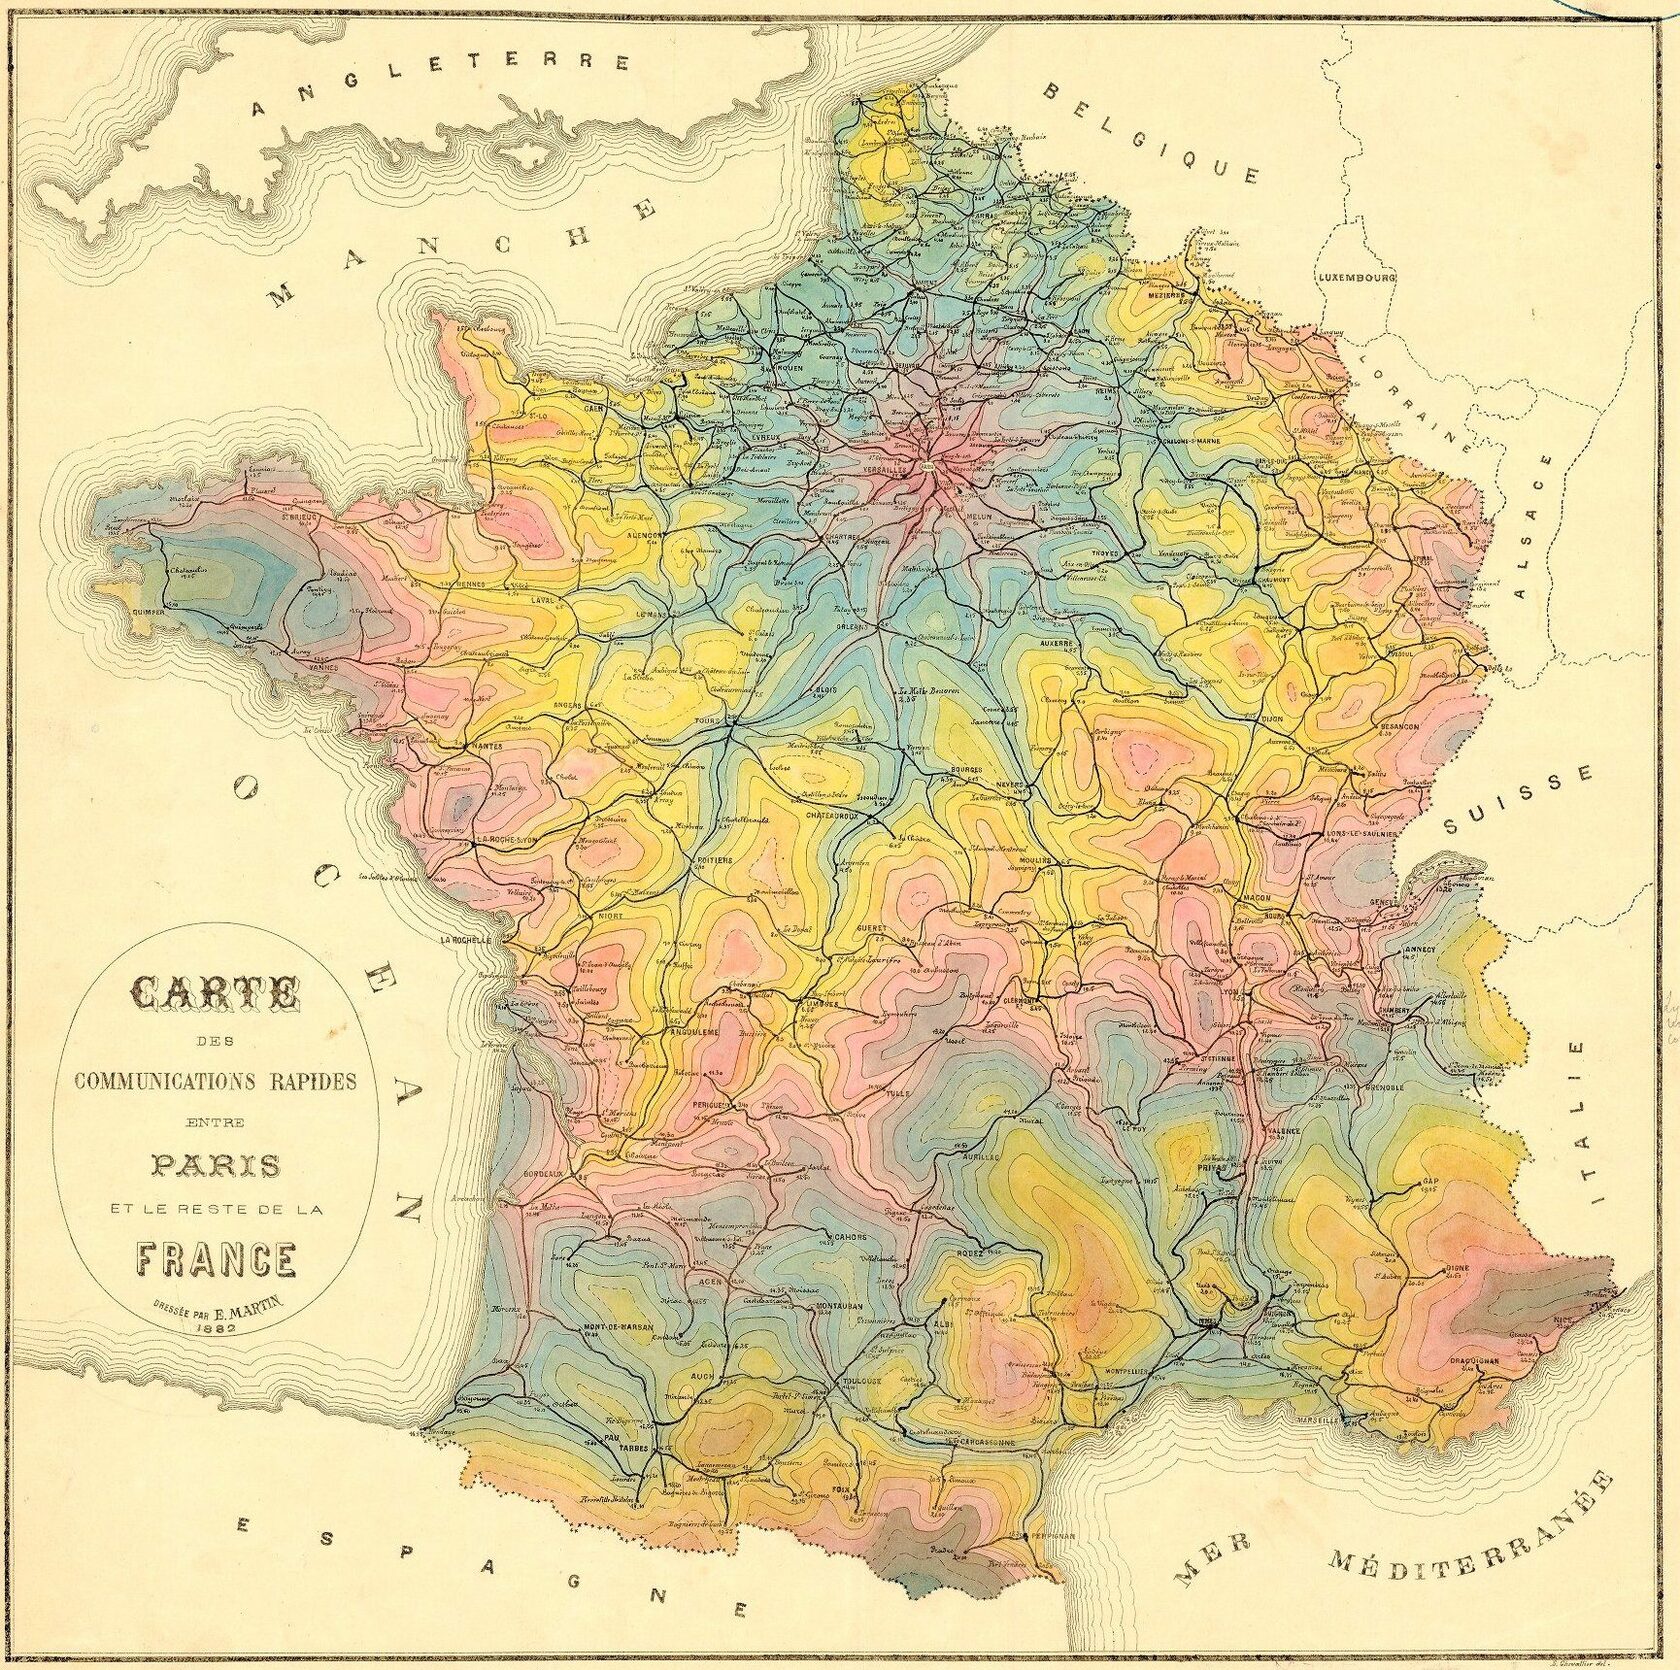 An 1882 isochrone map, showing travel times to and from Paris.